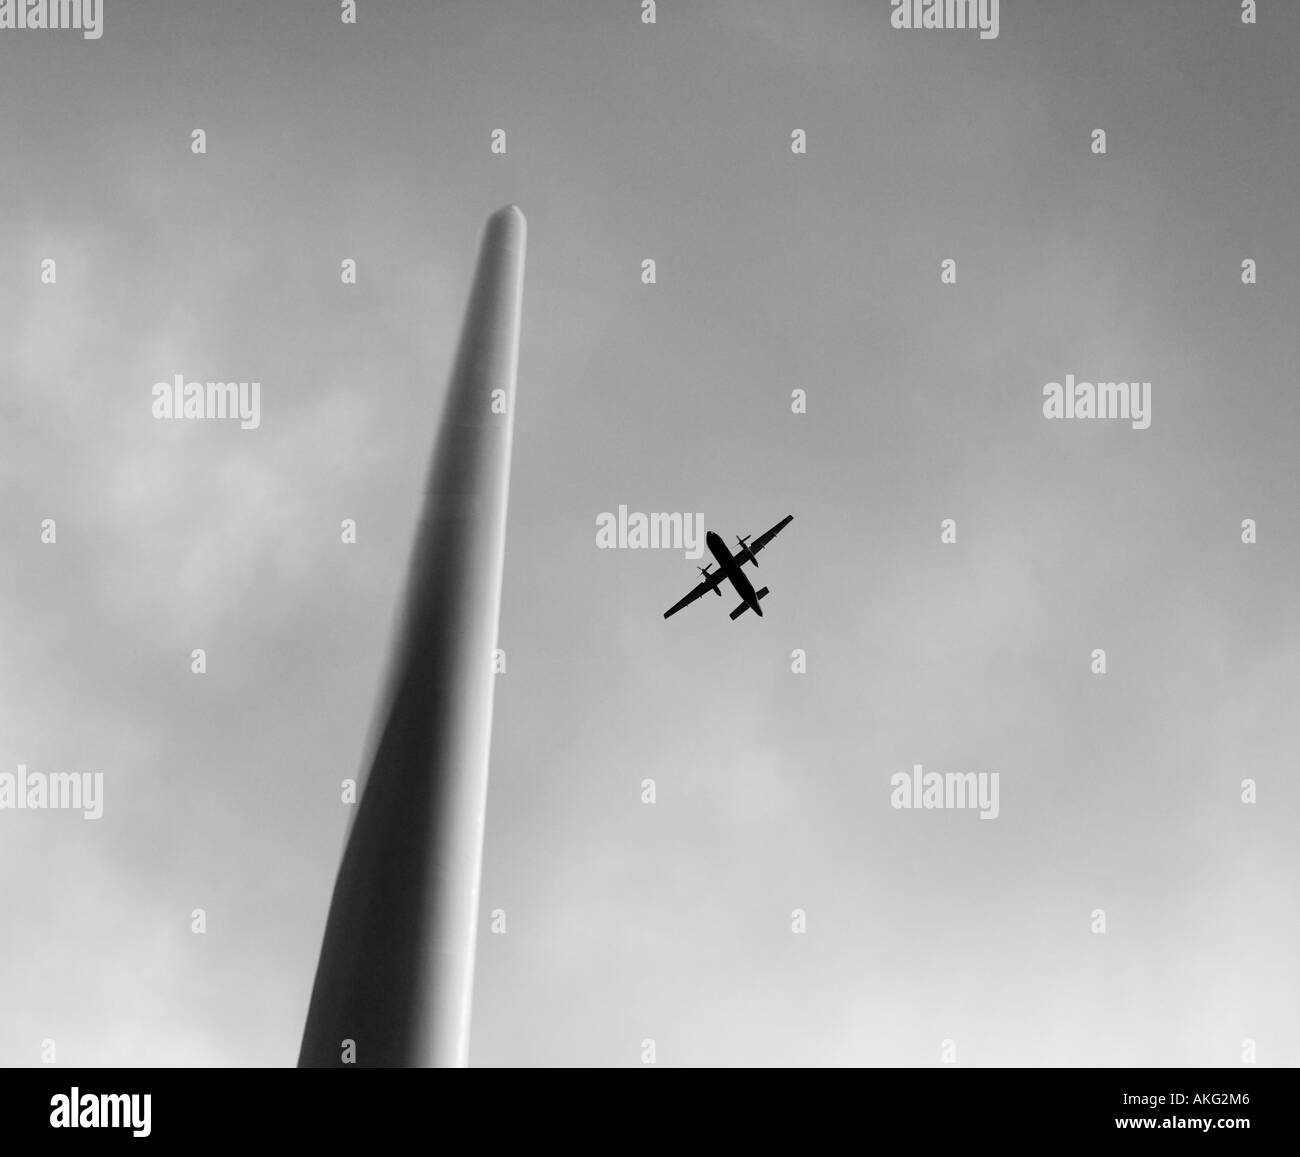 Aircraft flying behind a blade on a wind turbine tower, Scotland Stock Photo